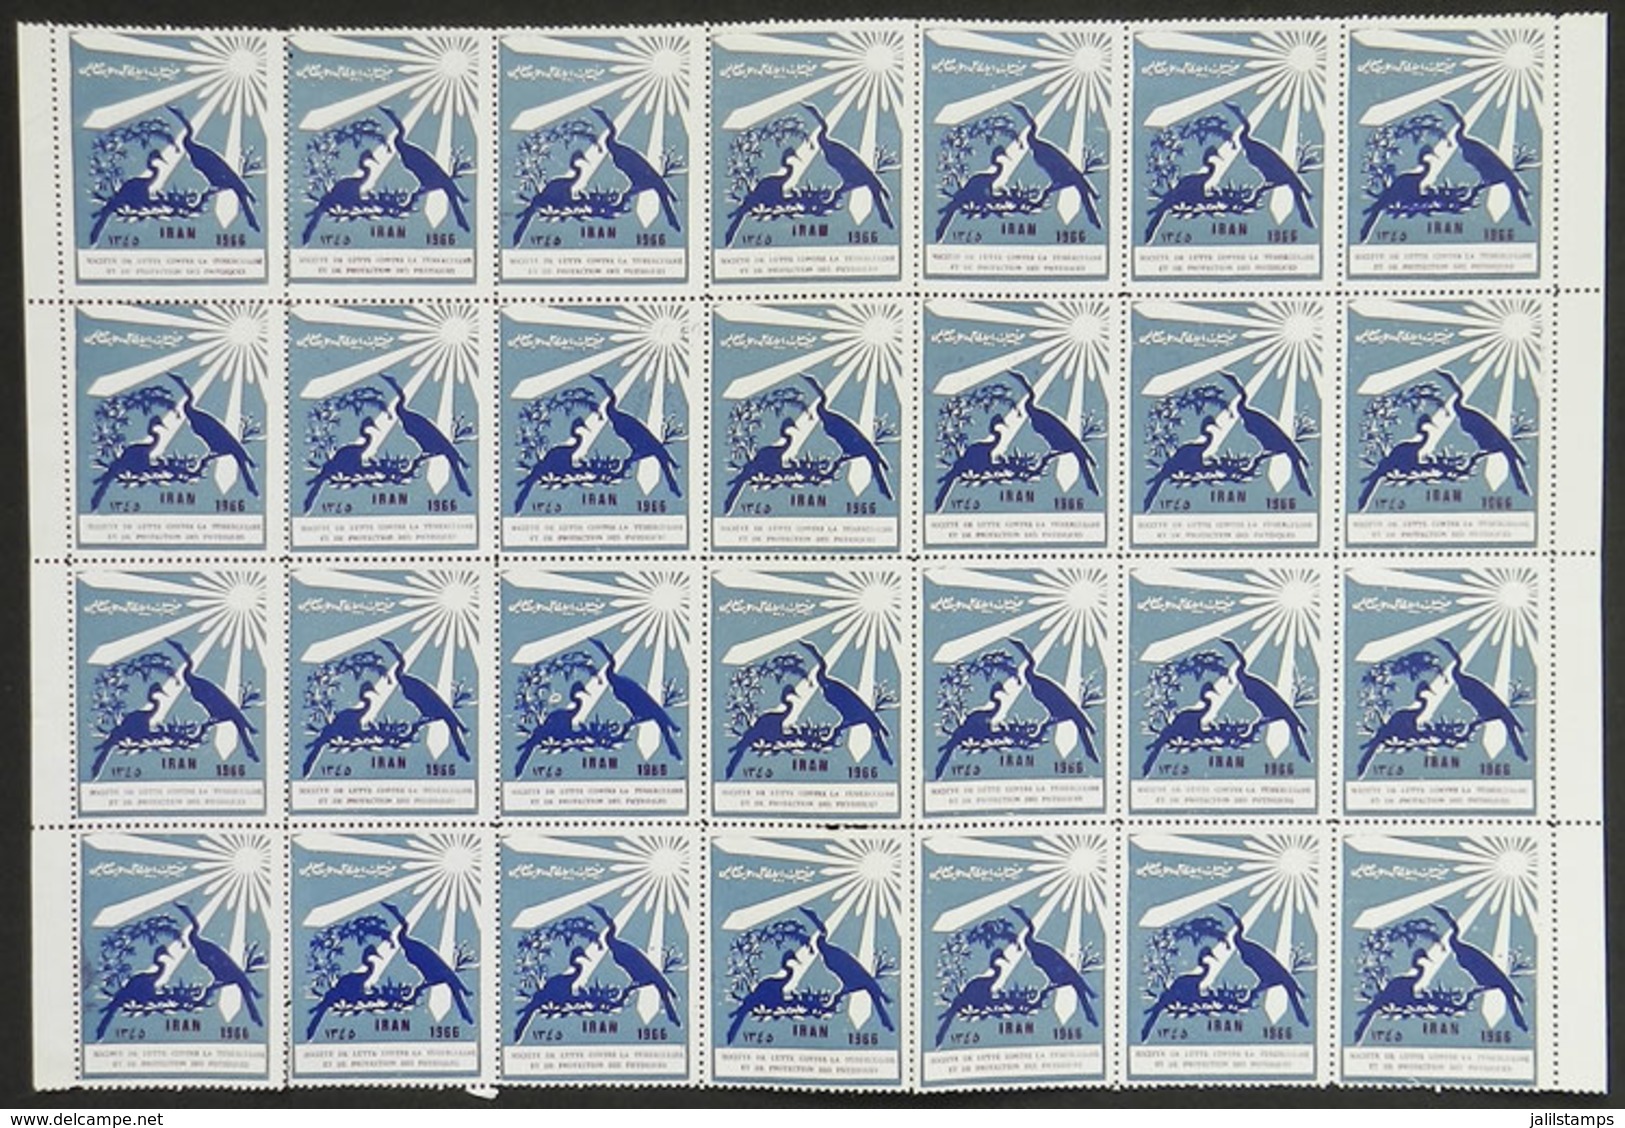 IRAN: FIGHT AGAINST TUBERCULOSIS: 1966 Issue, Large Block Of 28 Cinderellas, MNH, 2 Or 3 With Defects, Excellent General - Vignetten (Erinnophilie)